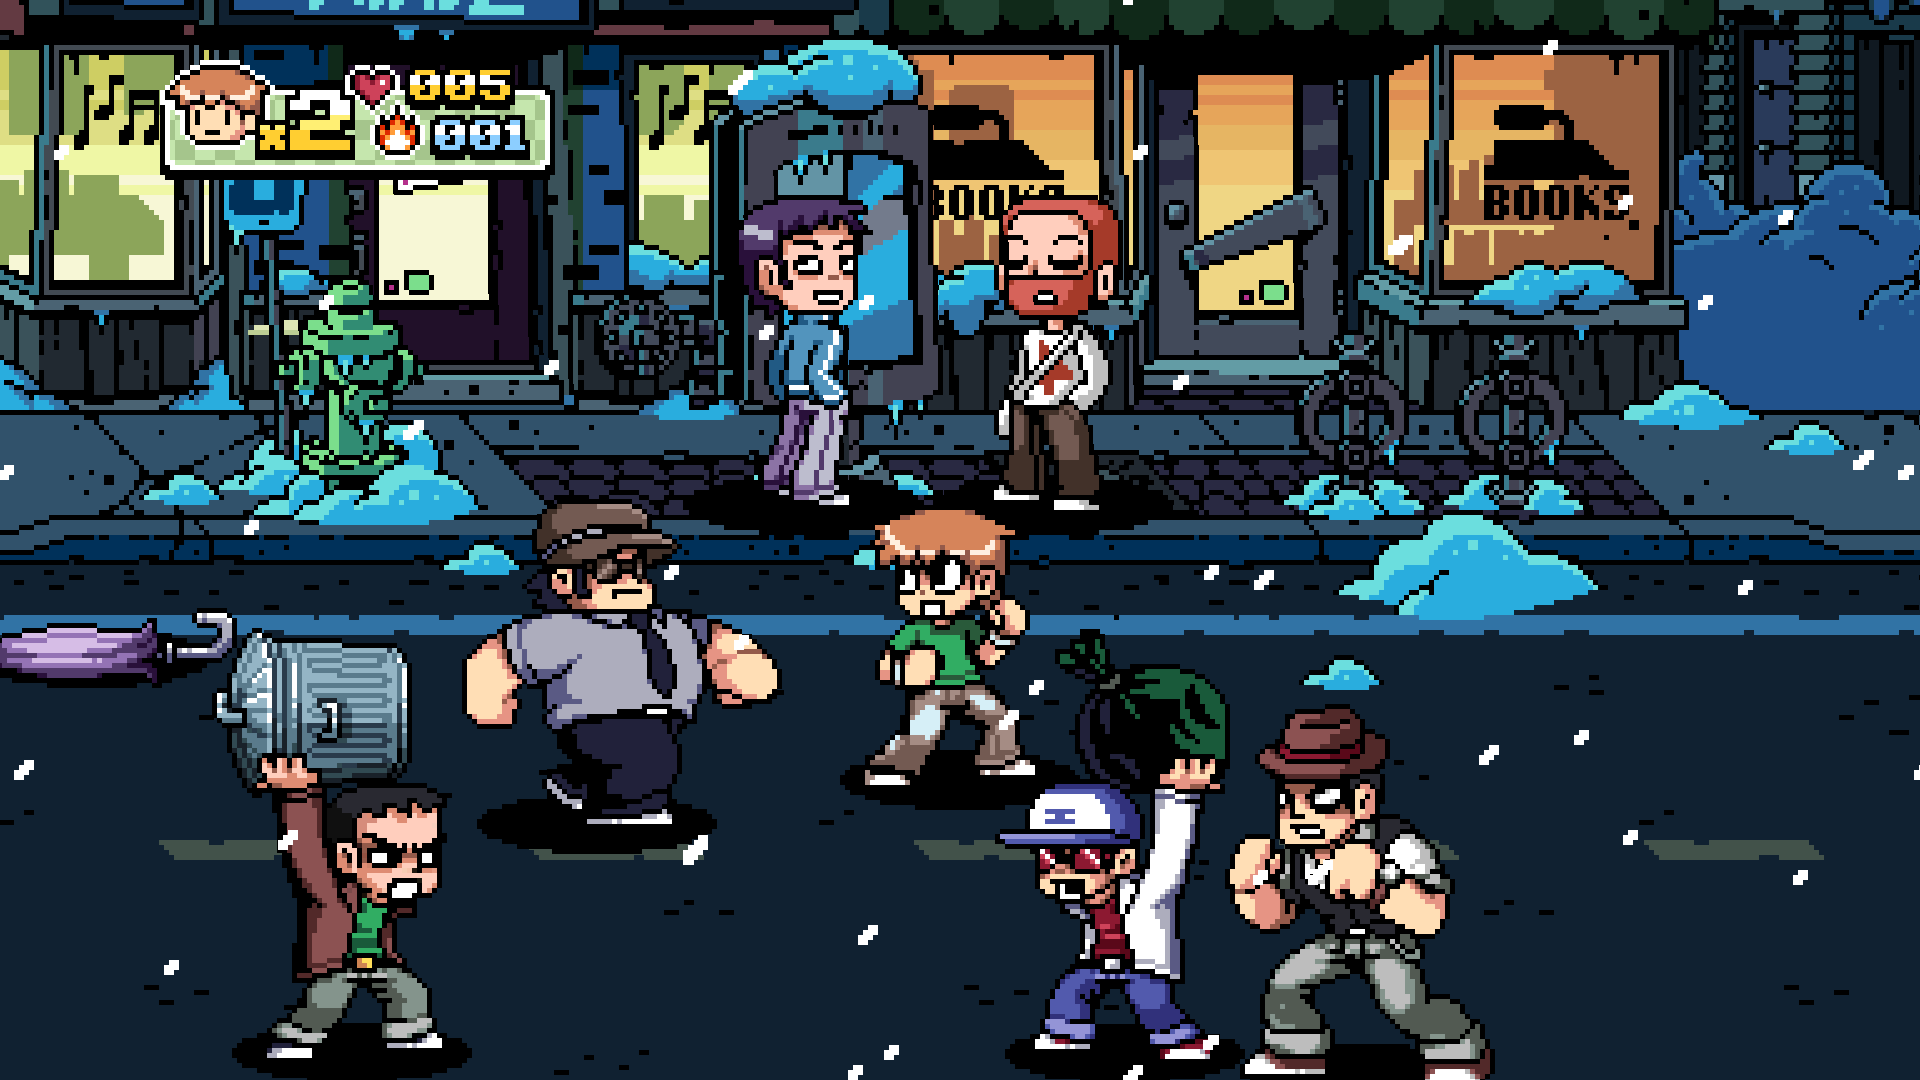 Scott Pilgrim faces off against generic, beat-em-up goons on the snowy streets of Toronto.